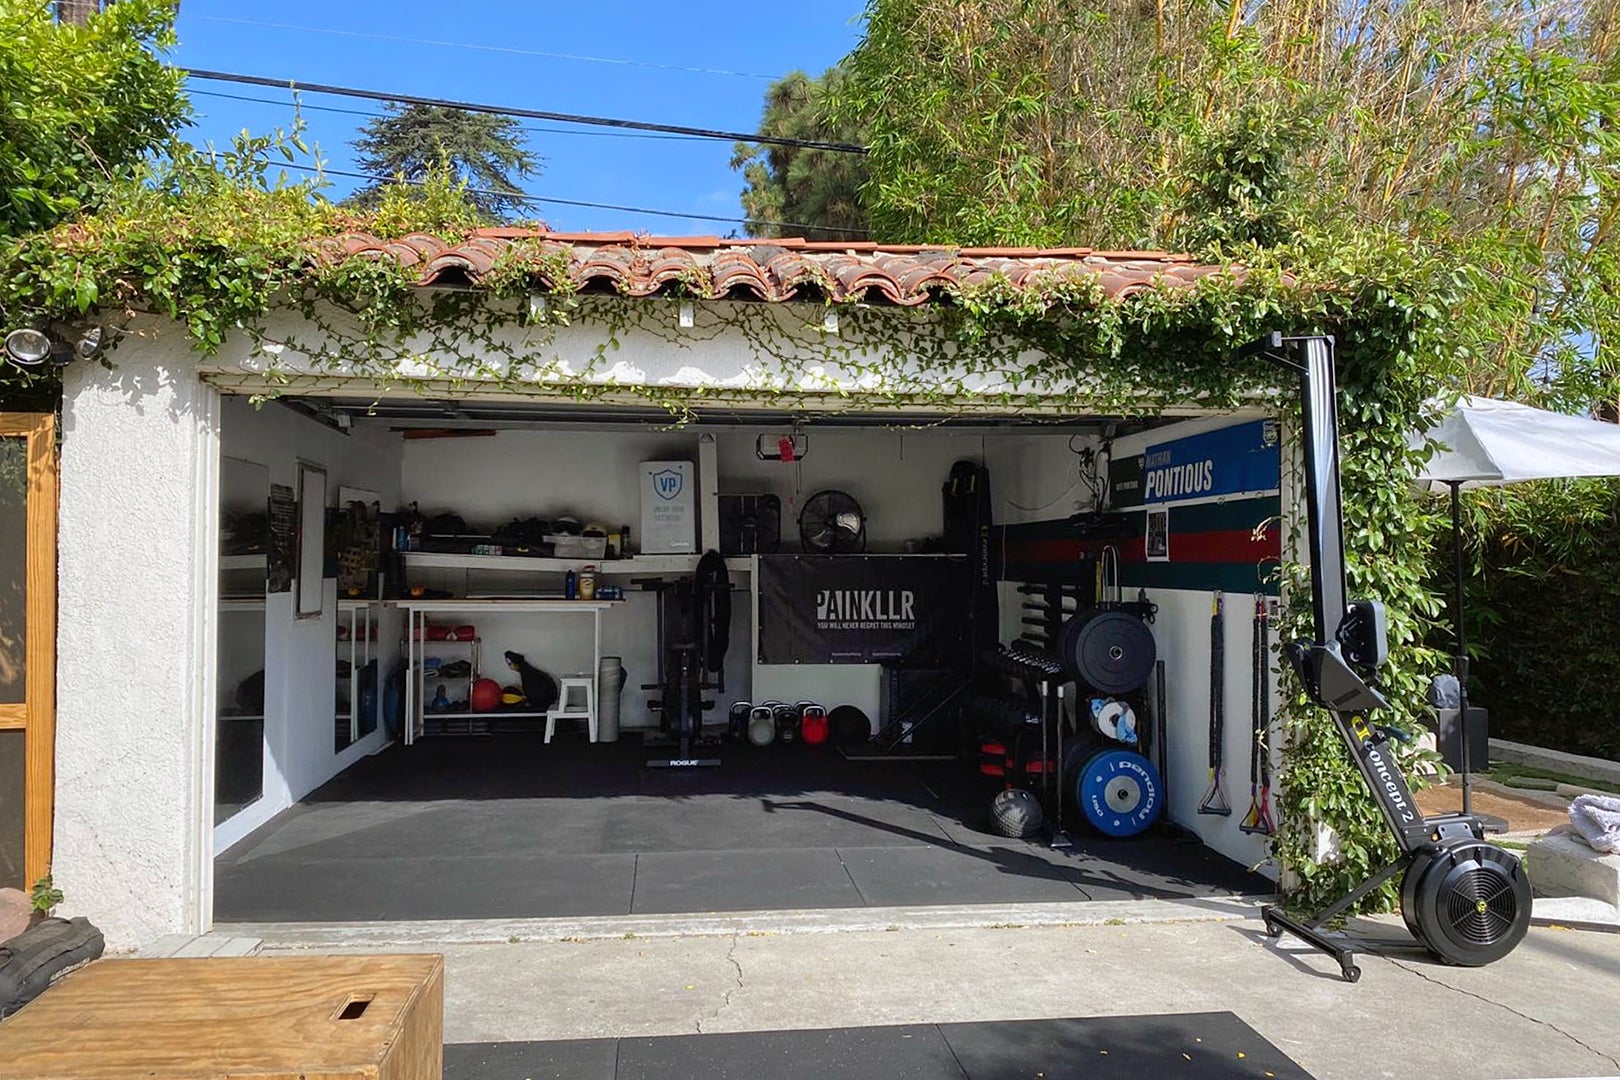 Wall-to-Wall Built-Ins Hide All the Utilitarian Odds and Ends in This Garage-Turned-Gym